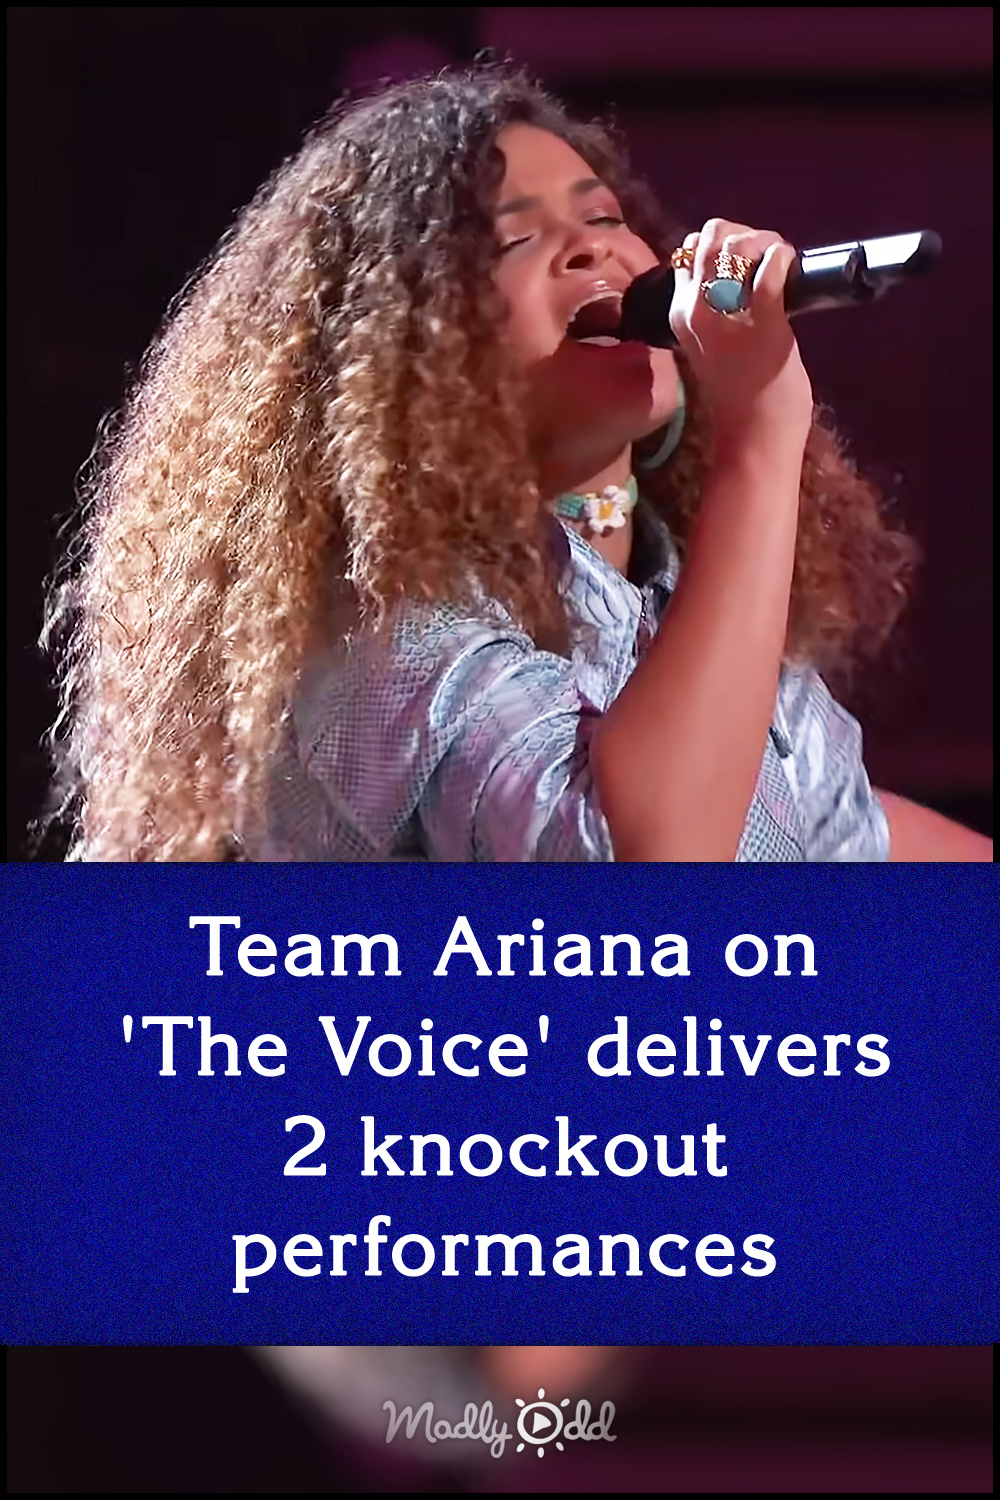 Team Ariana on \'The Voice\' delivers 2 knockout performances